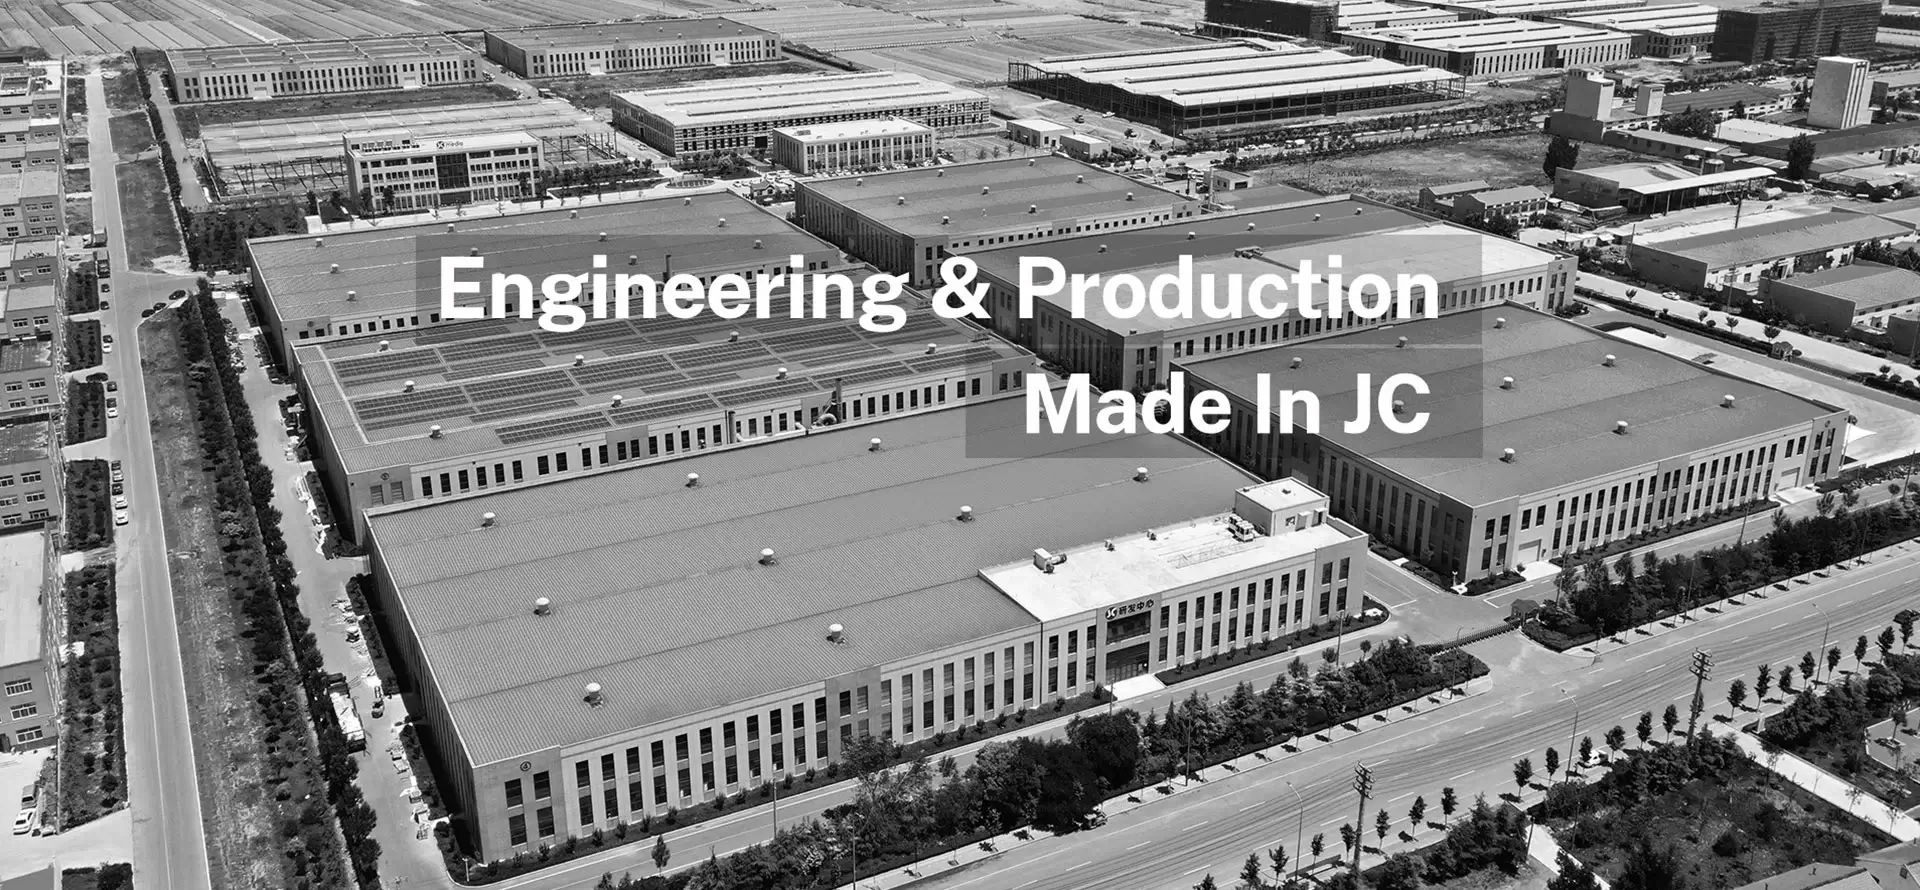 Engineering & Production Made In JC